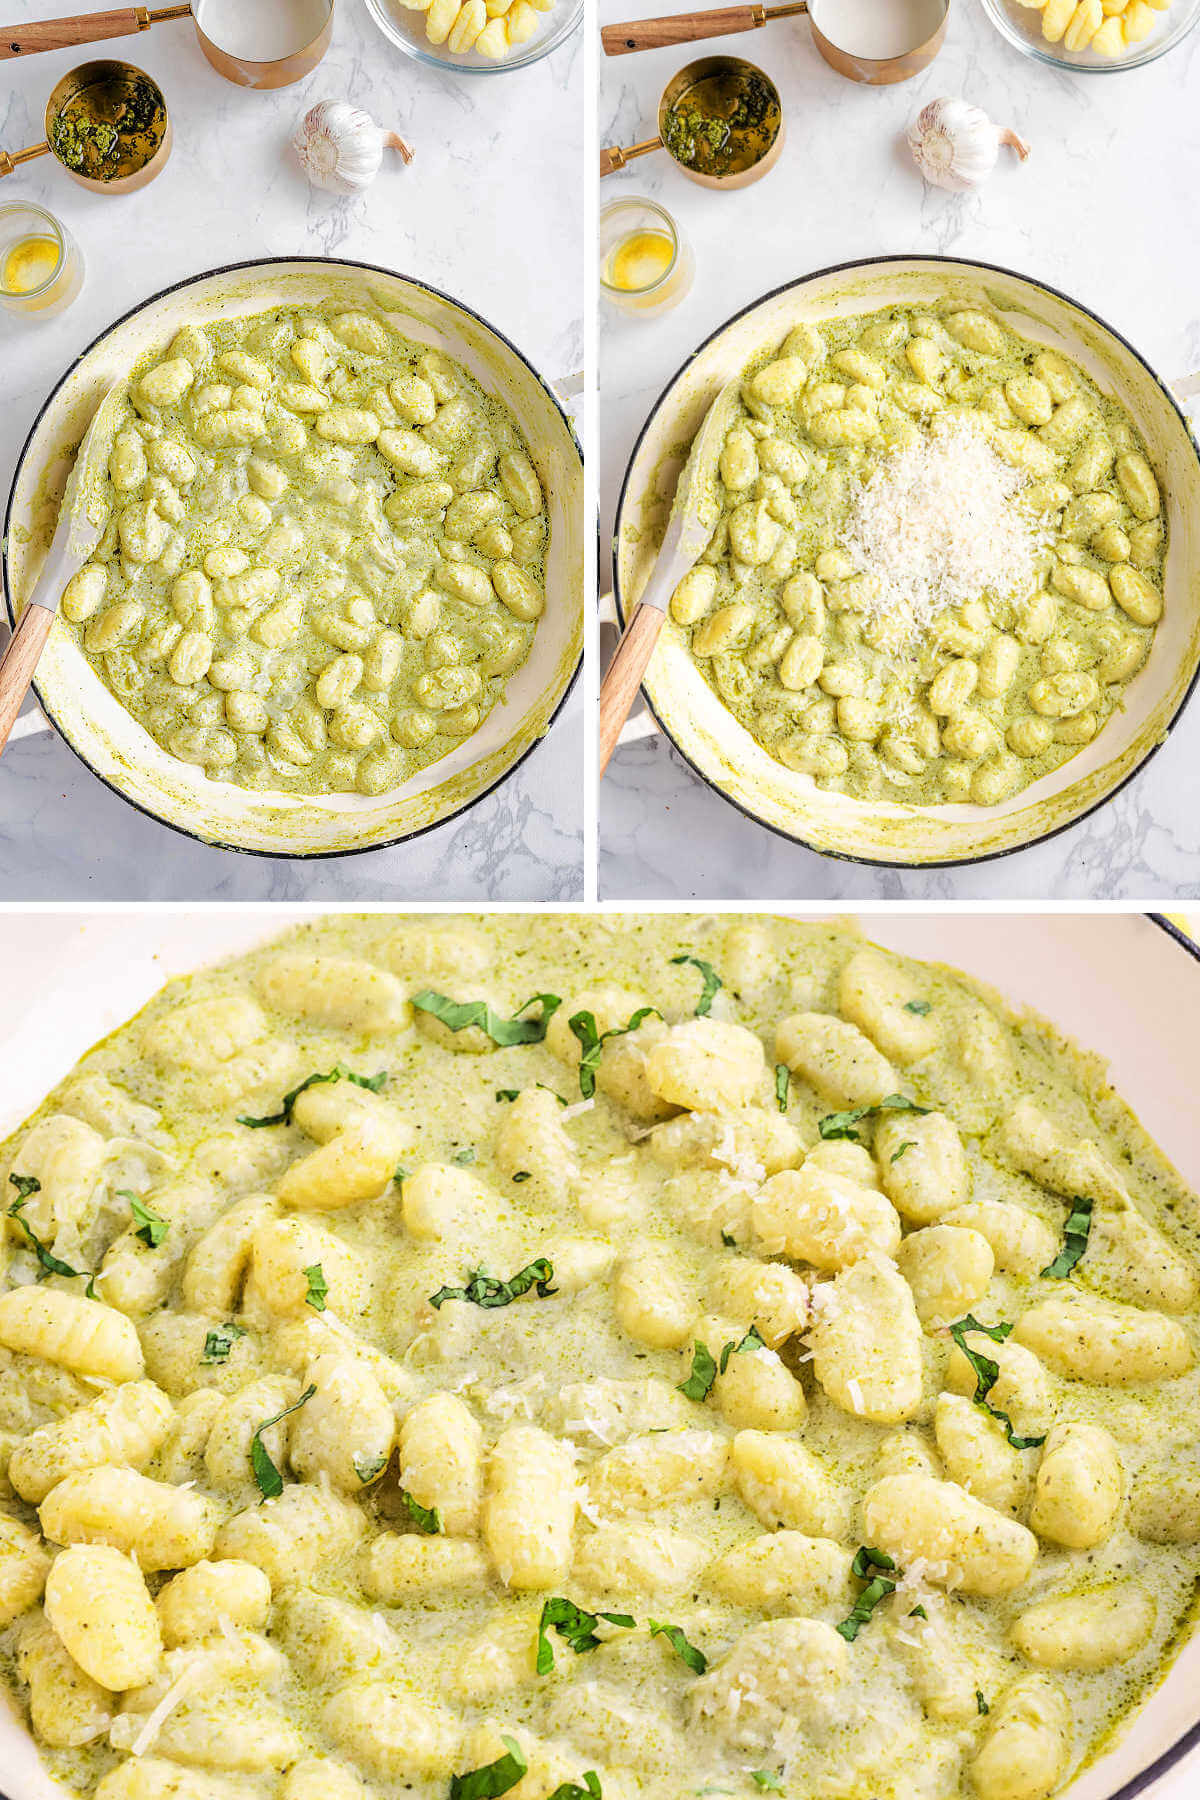 stirring gnocchi and parmesan cheese into a cream sauce.